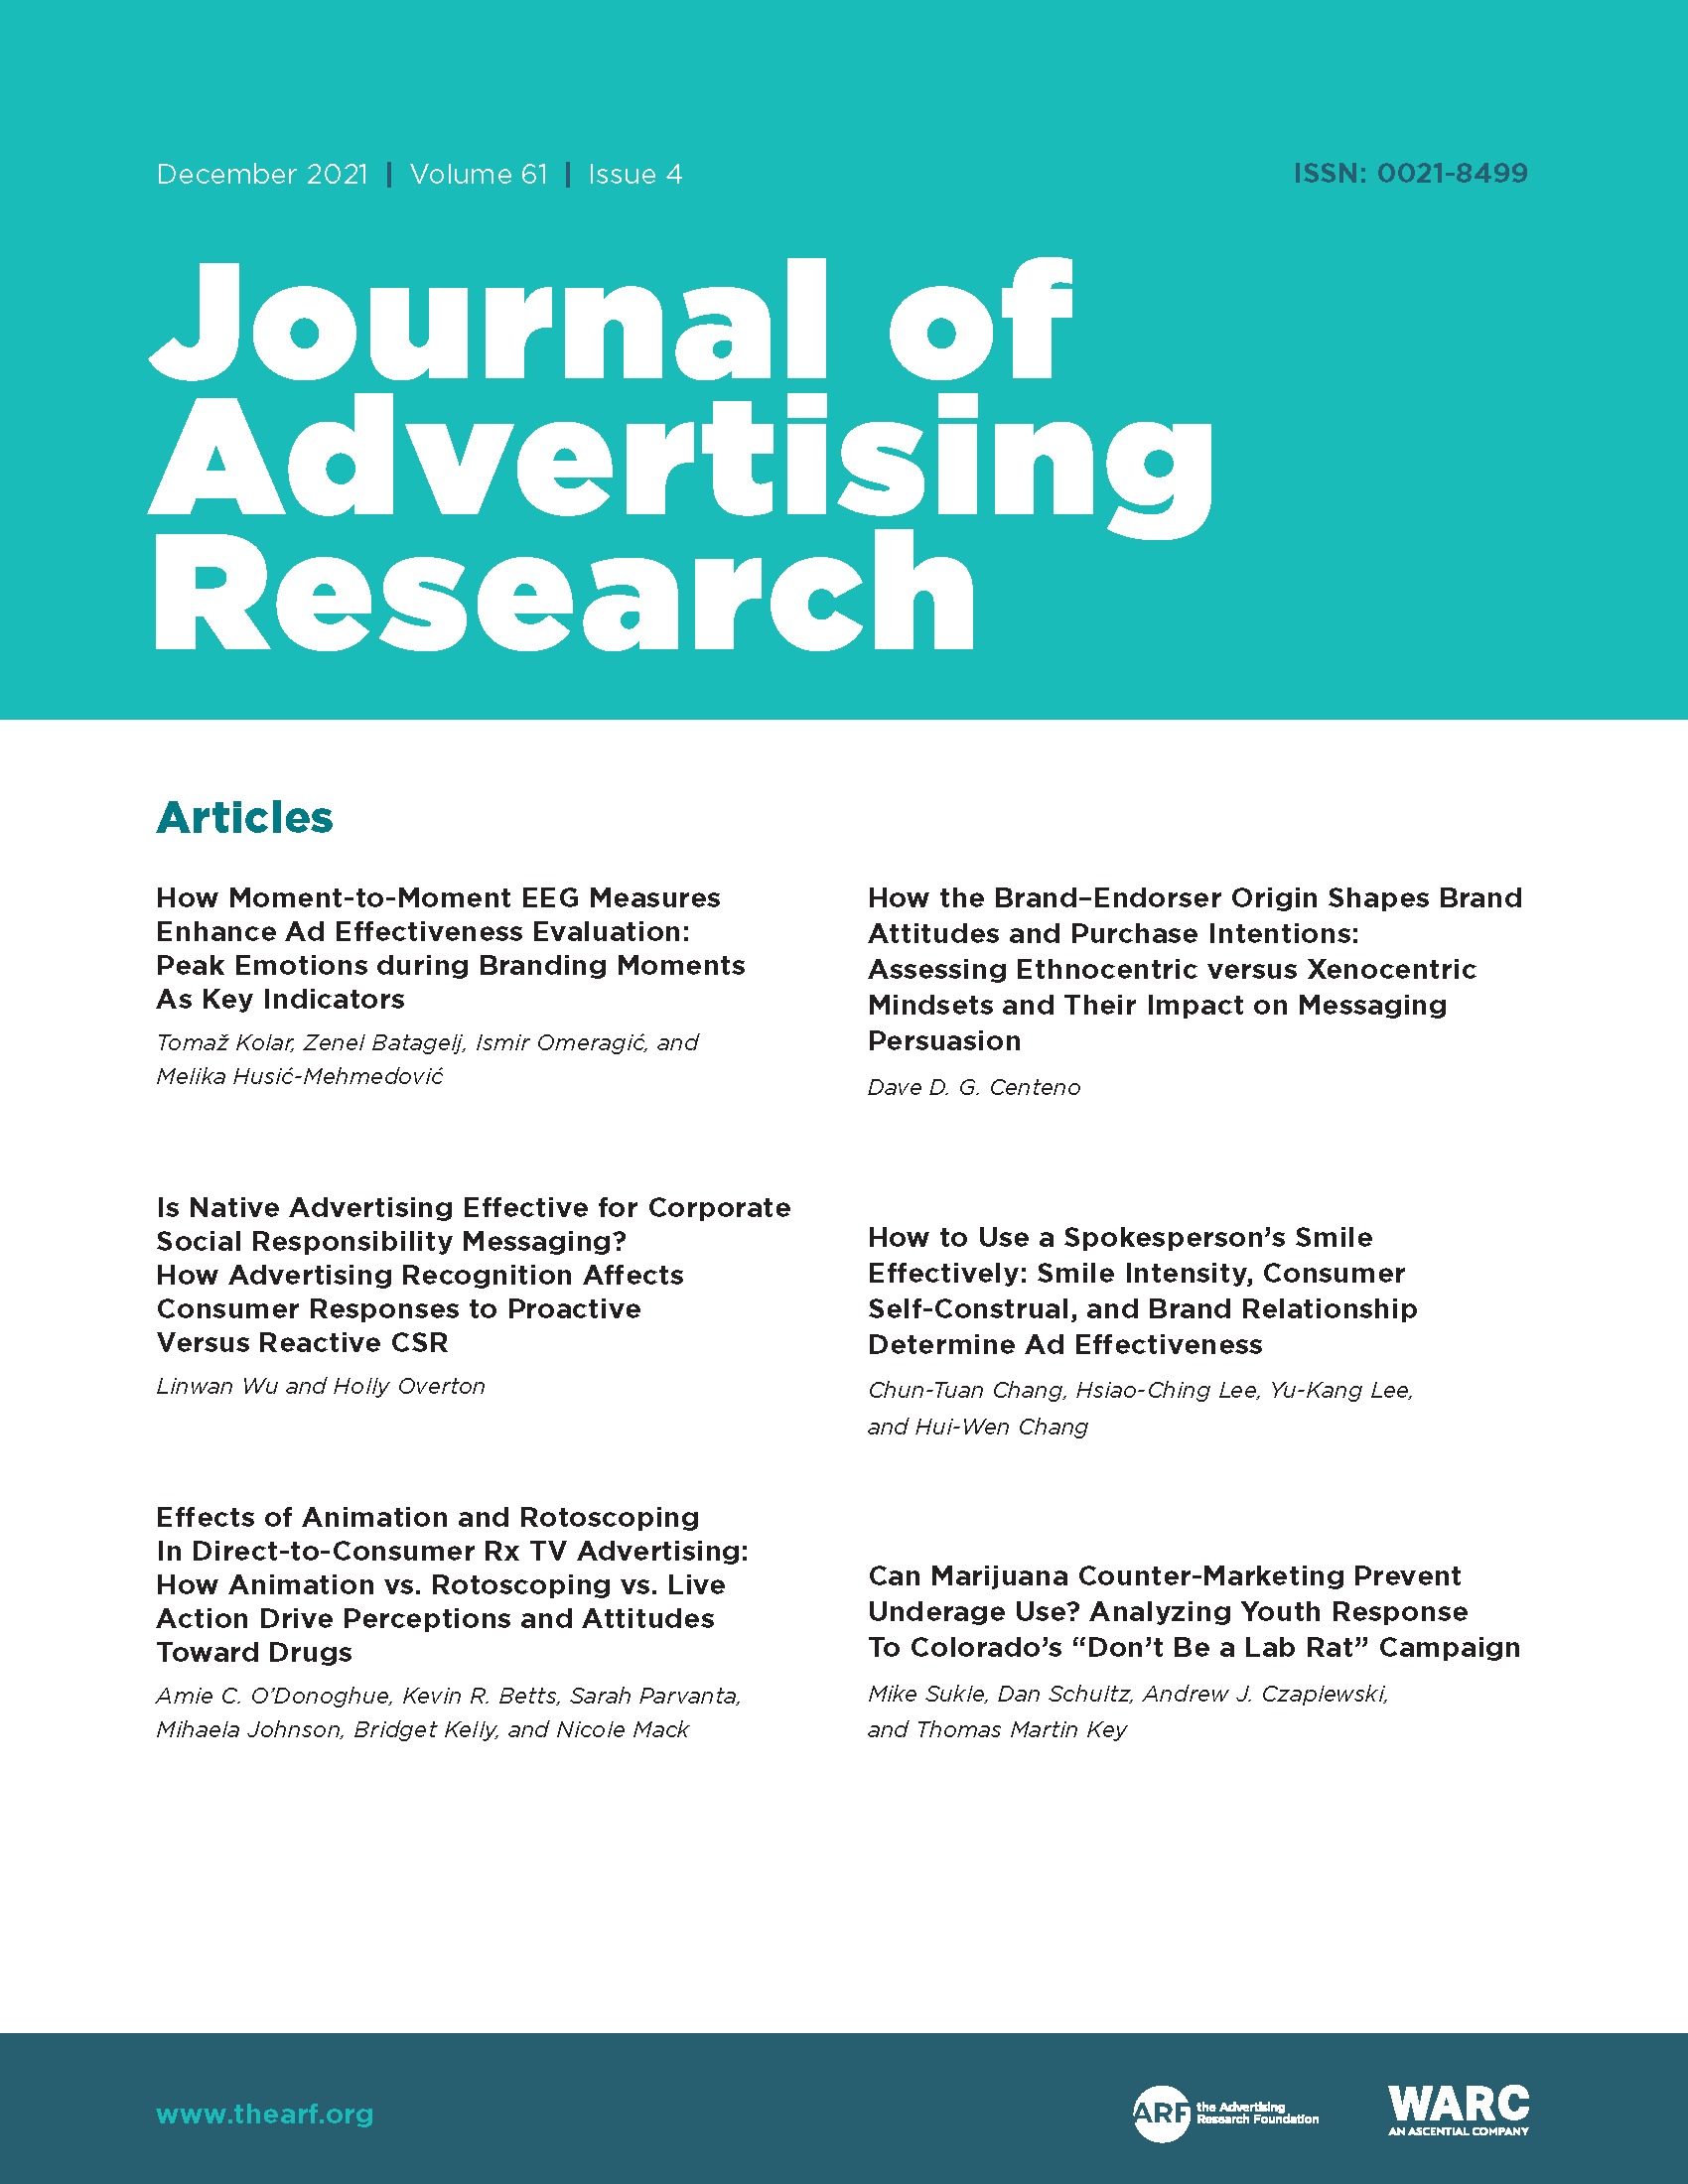 Effects of Animation and Rotoscoping In Direct-to-Consumer Rx TV  Advertising | the Journal of Advertising Research